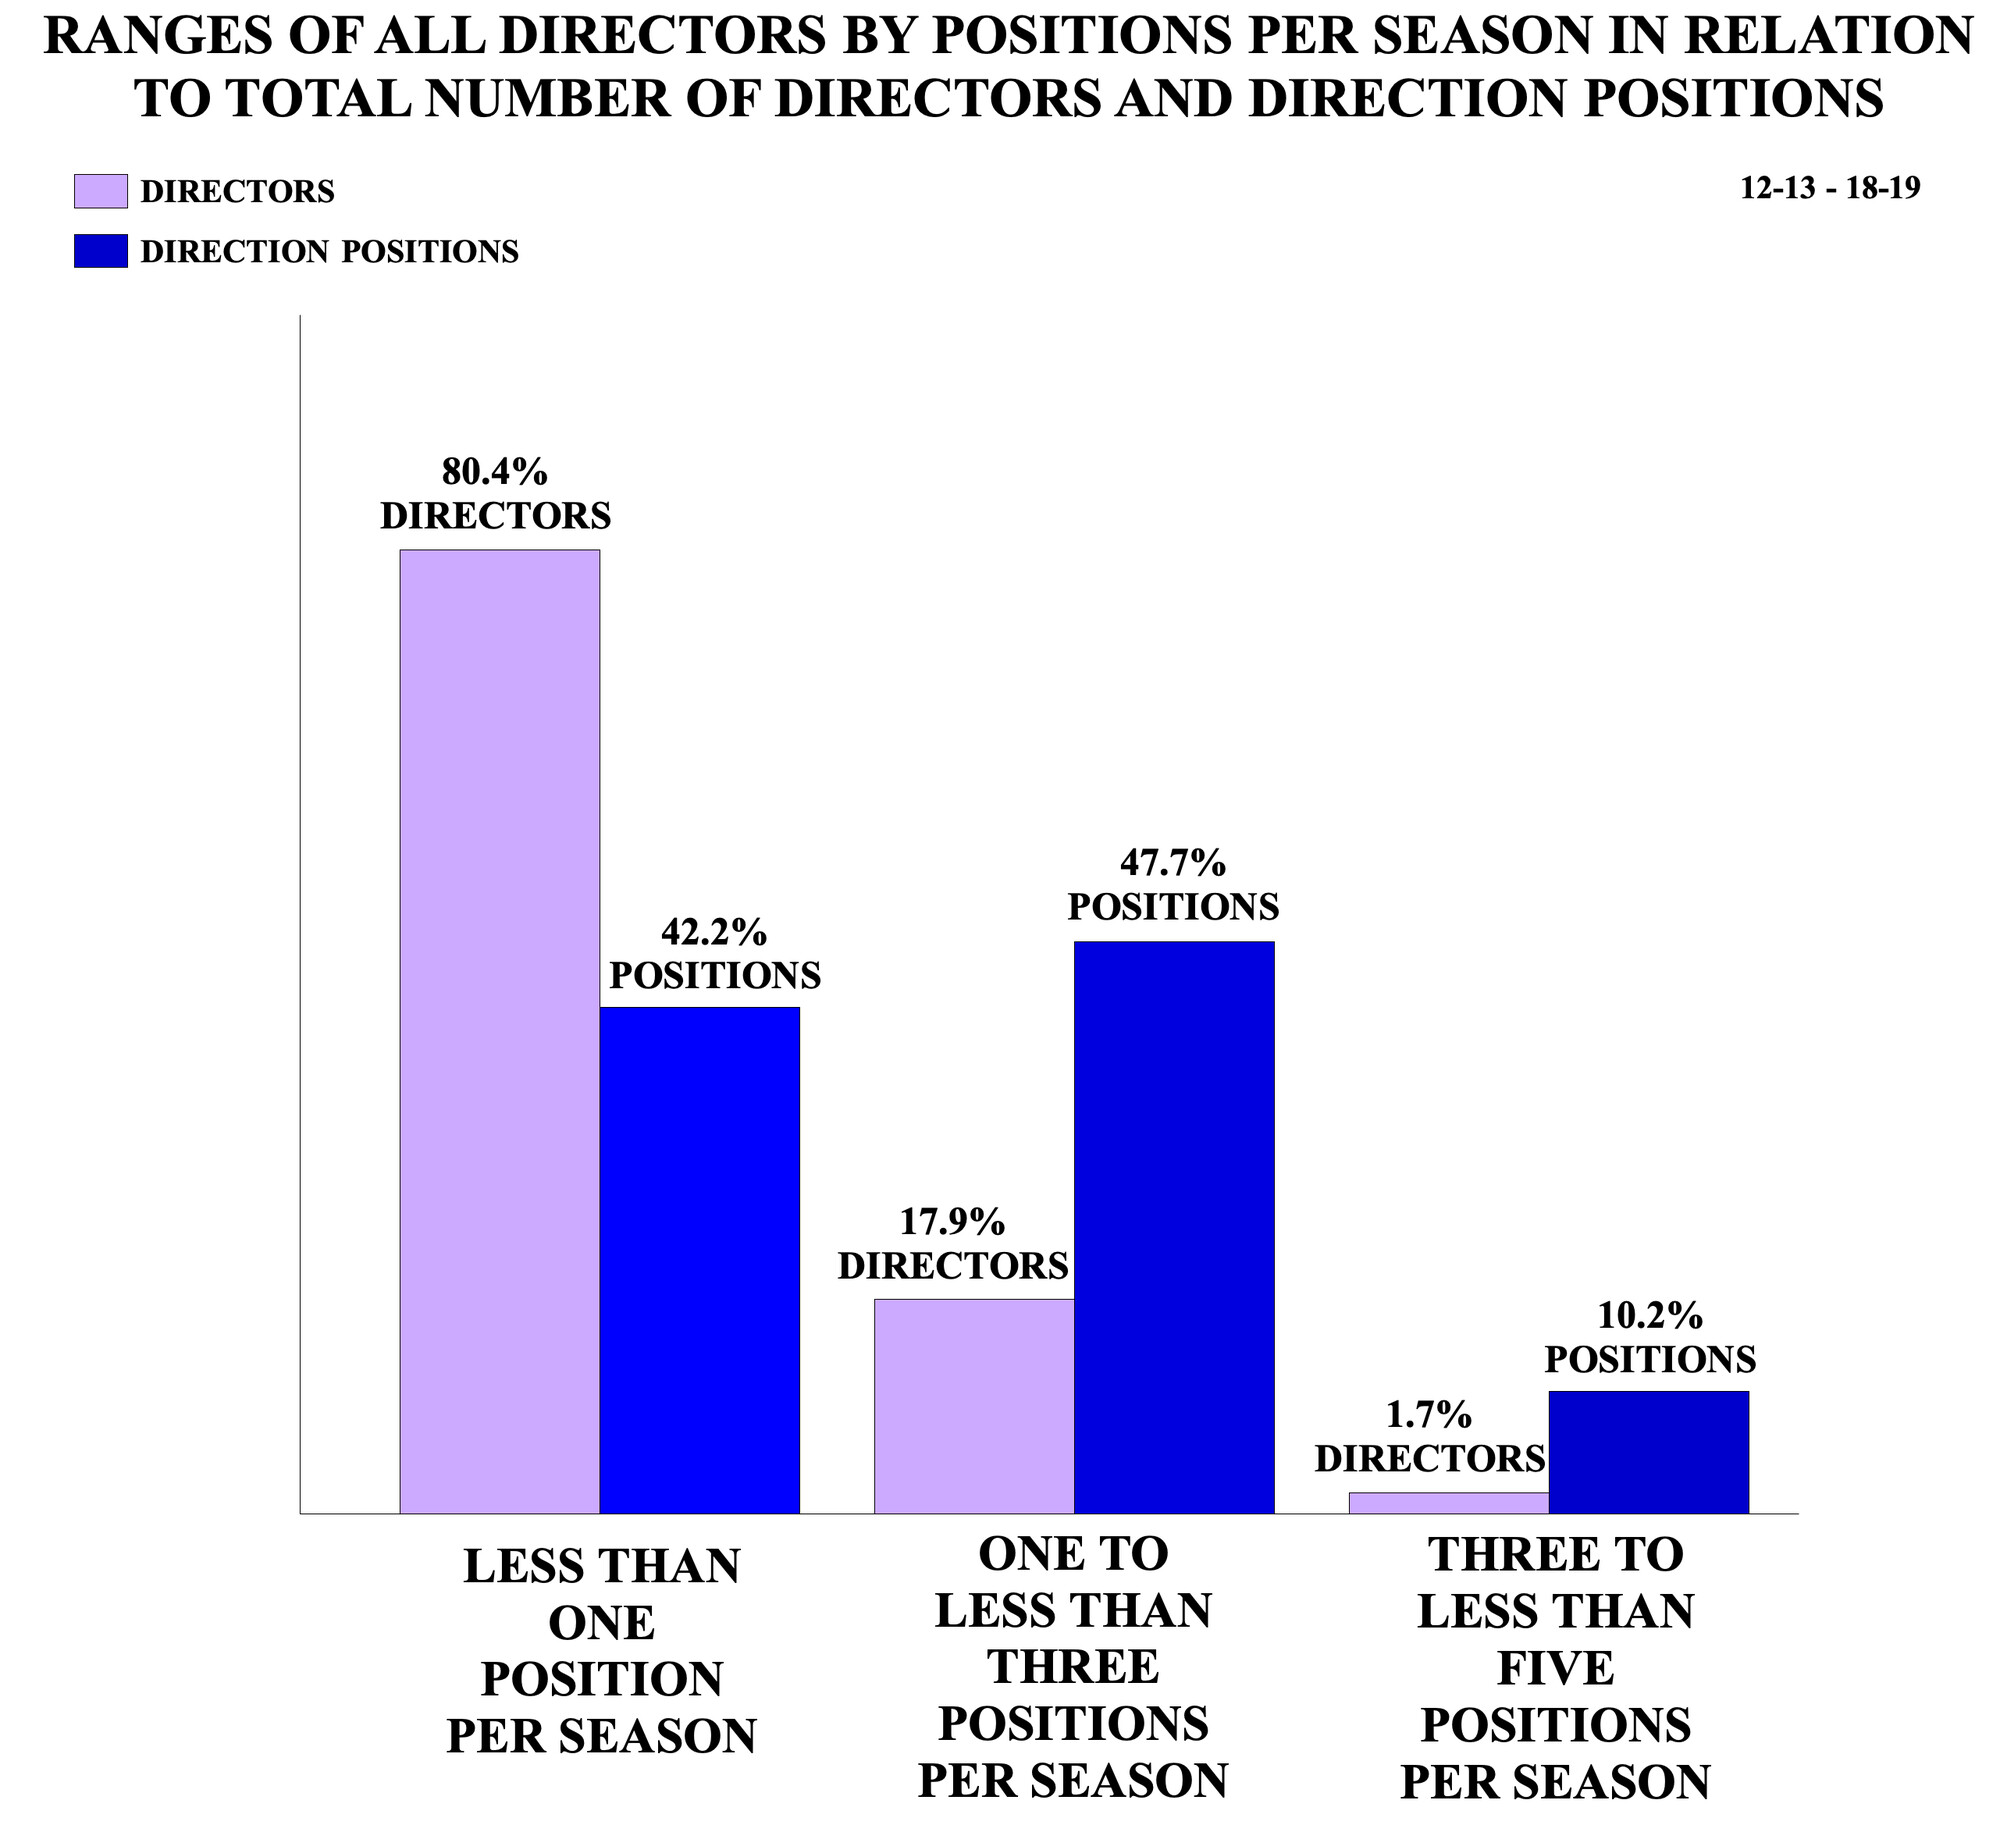 Ranges of Directors by Positions Per Season in Relation to Total Number of Directors and Direction Positions